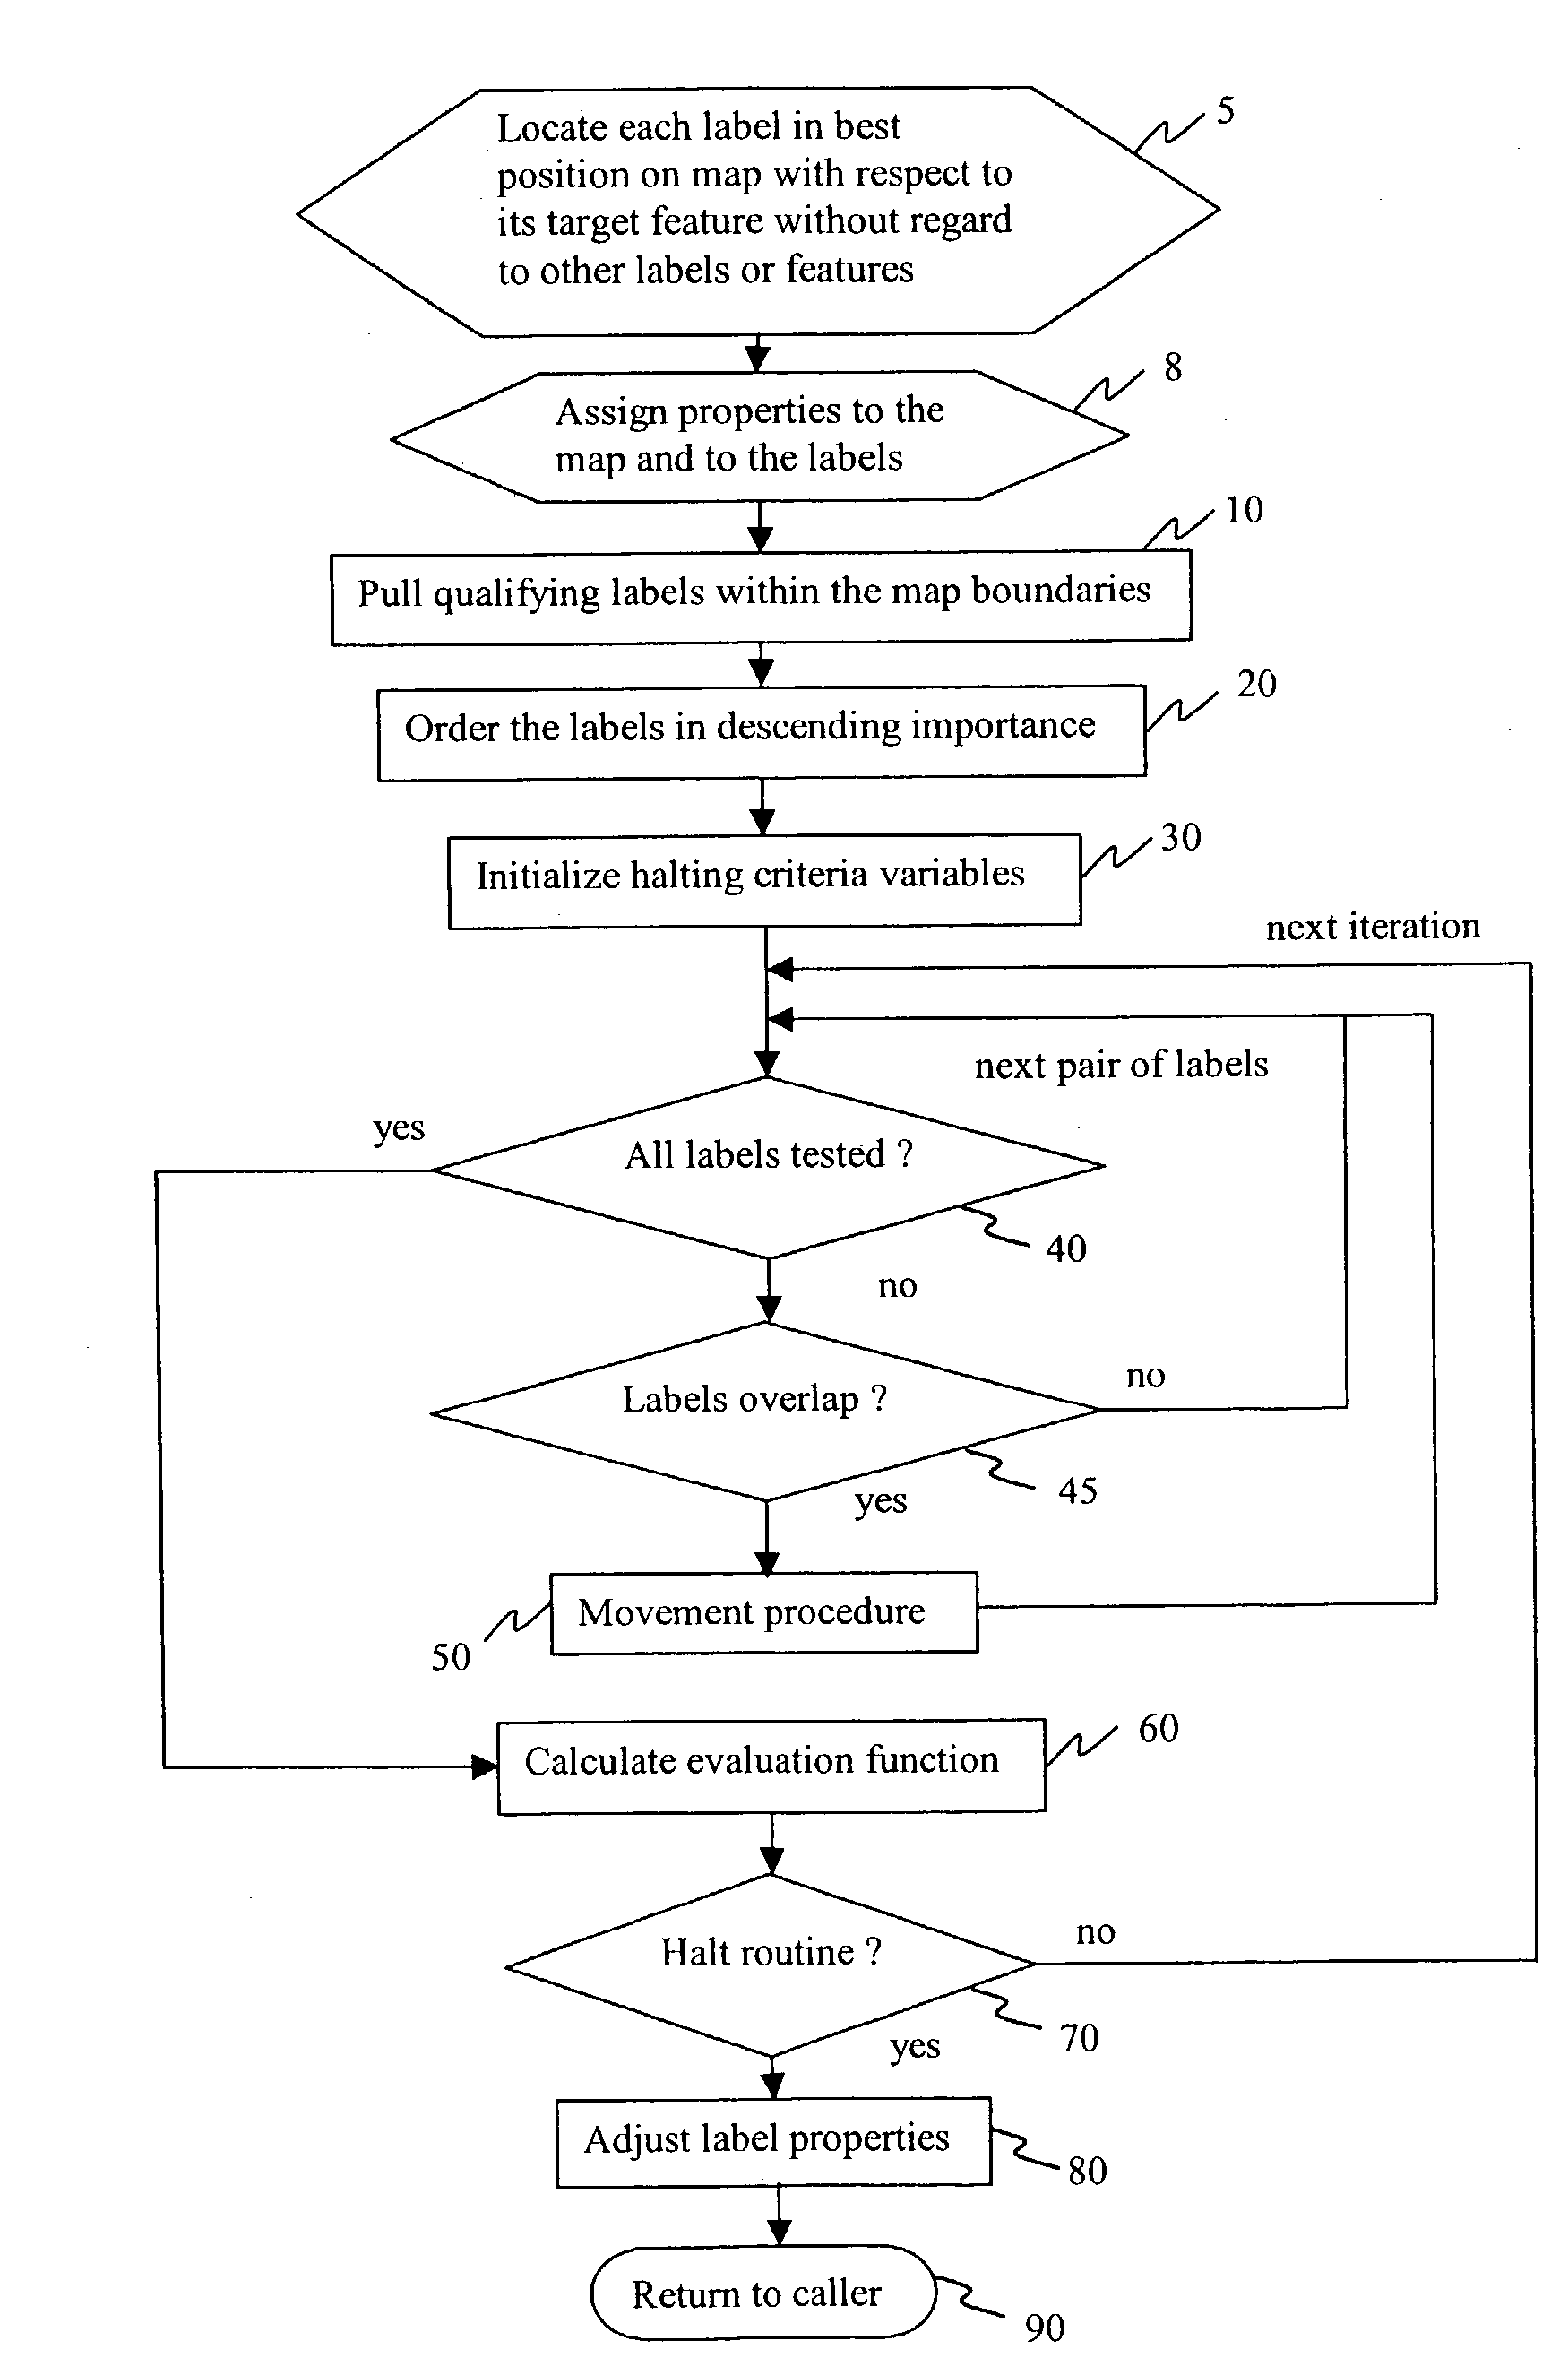 System and method for labeling maps